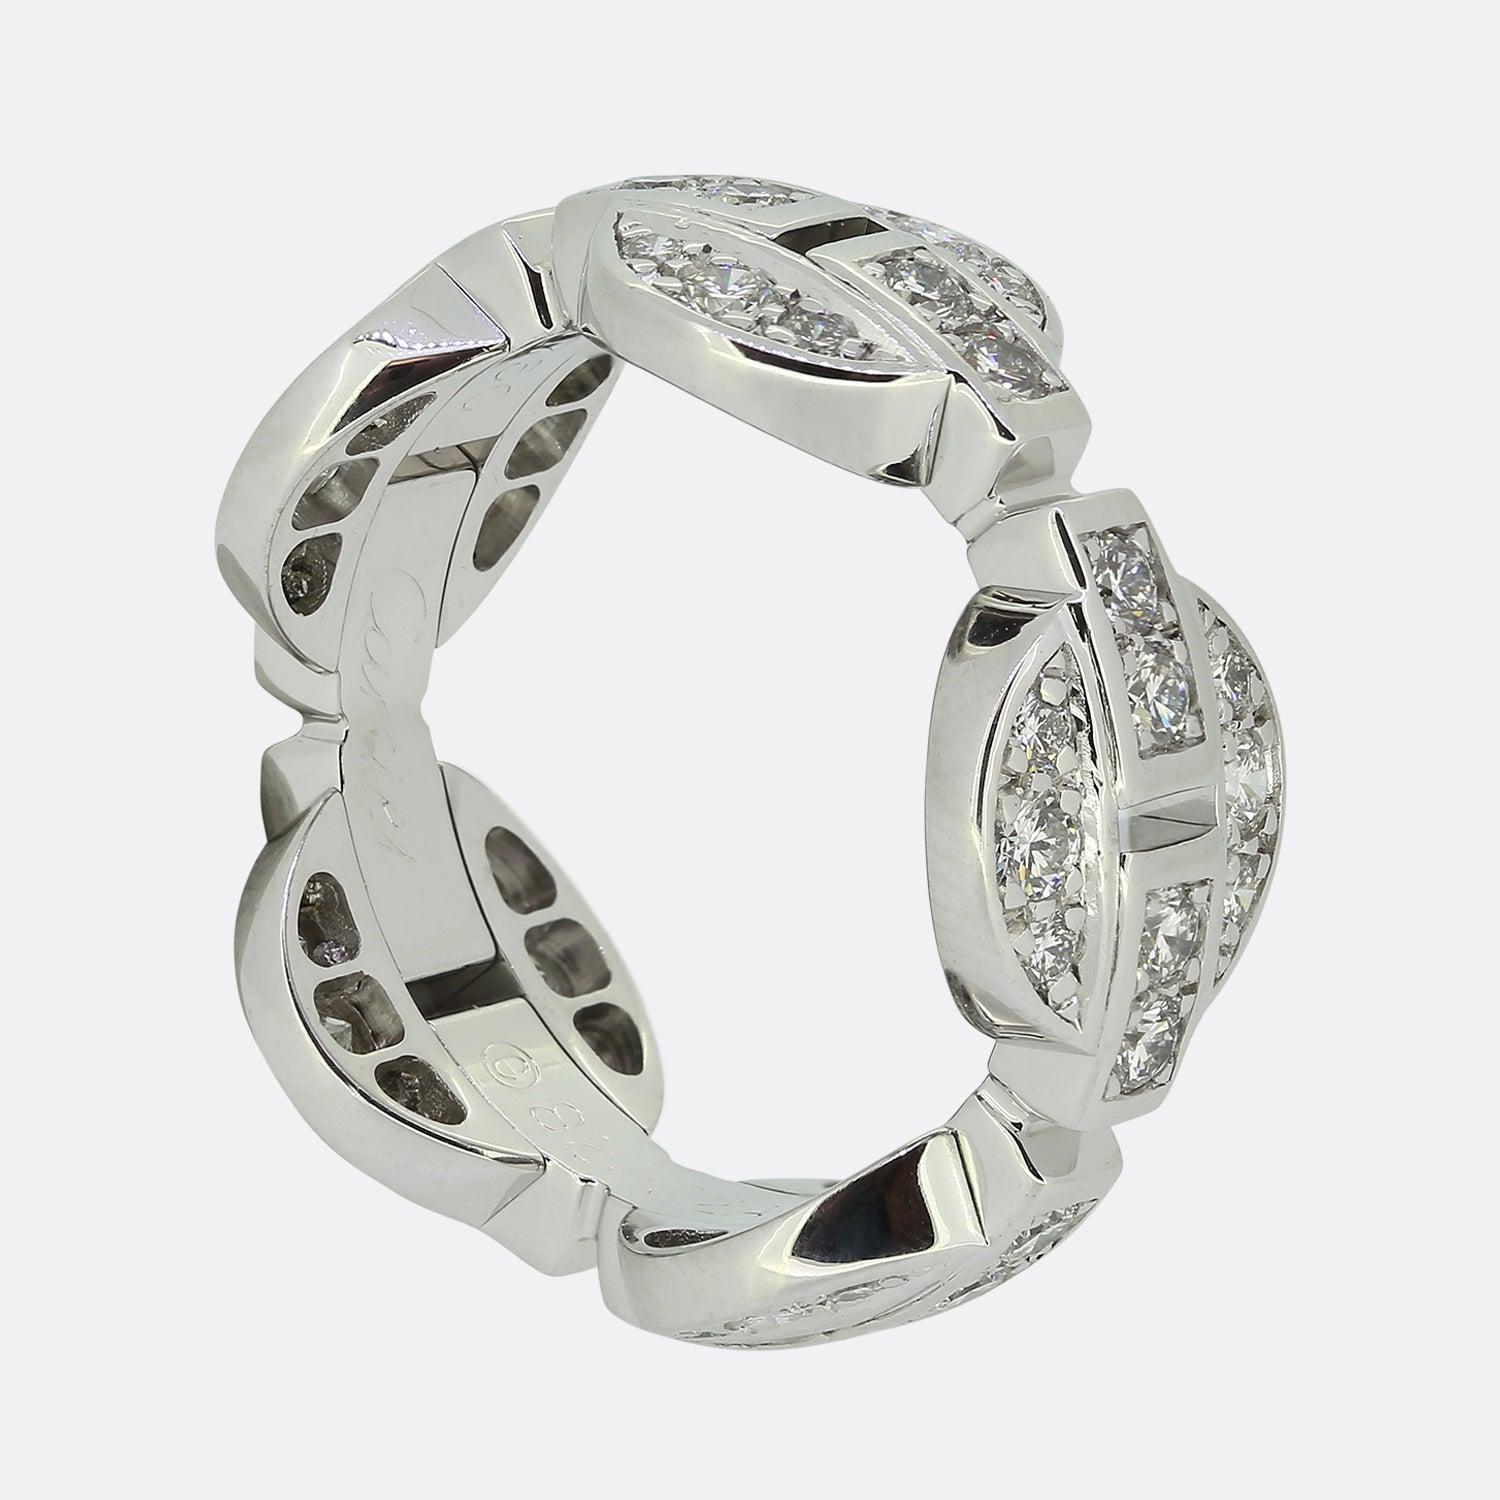 Here we have a beautiful diamond ring from the world renowned luxury jewellery house of Cartier. This particular piece forms part of their Himalia collection and features five circular motifs all perfectly inlaid with fine quality diamonds, linked